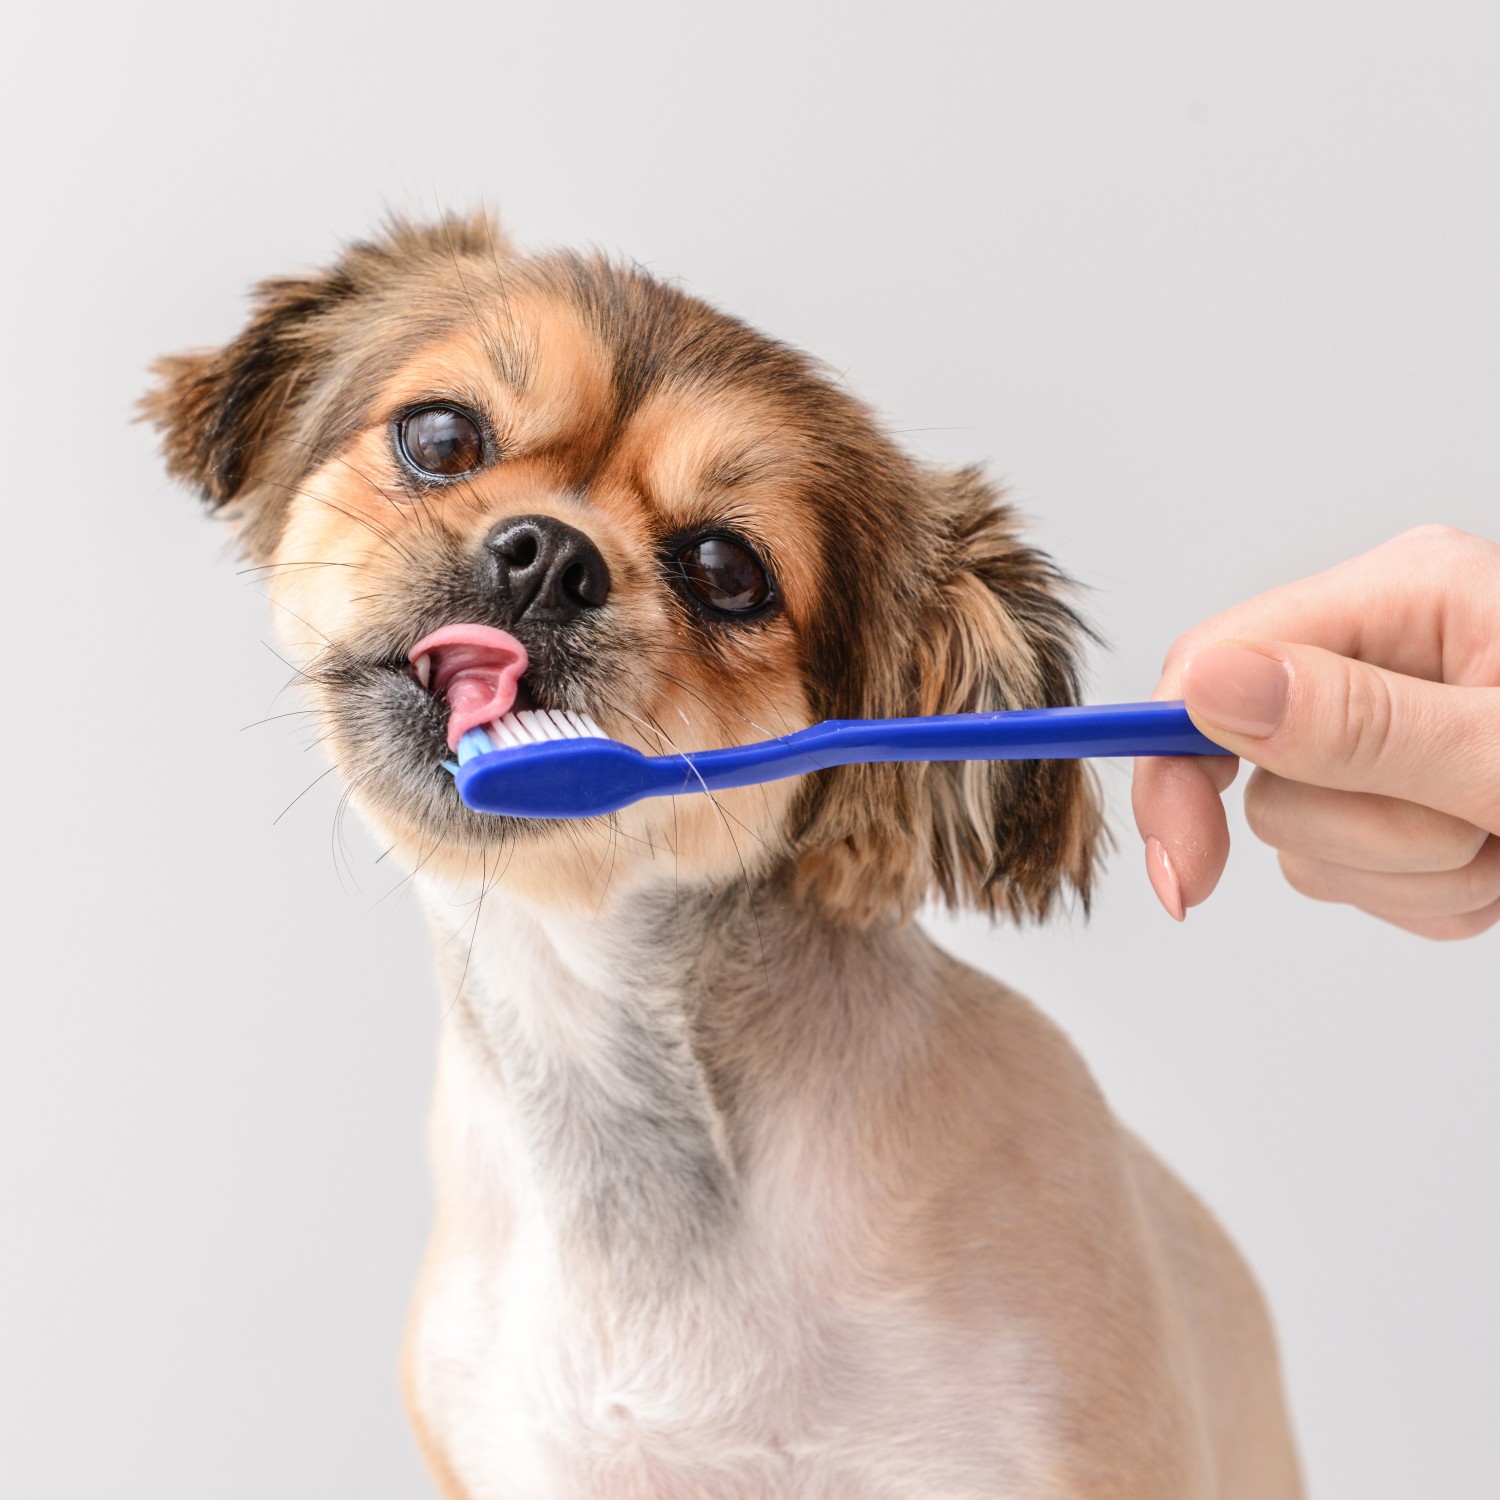 Dog with Toothbrush